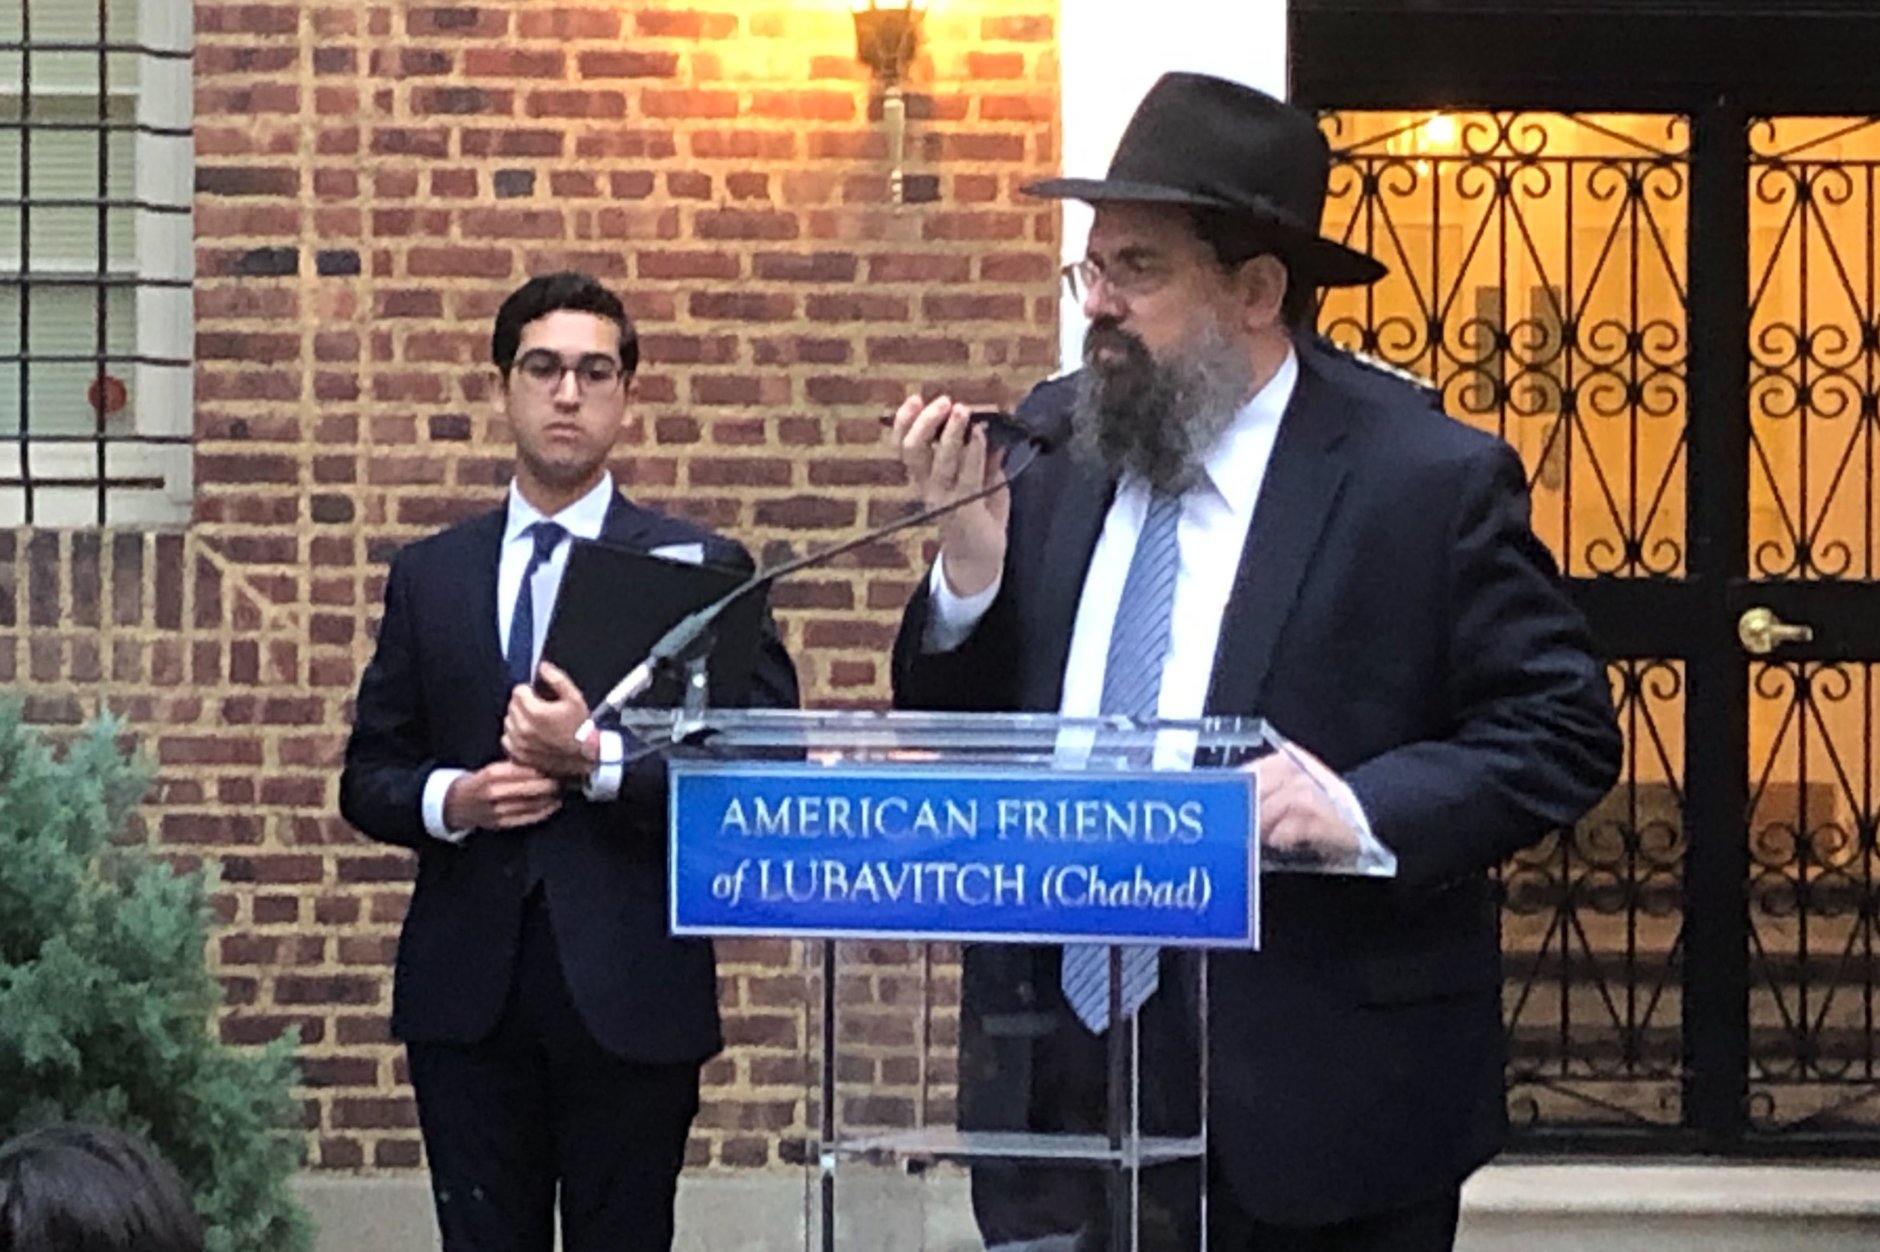 Rabbi Levi Shemtov of American Friends of Lubavitch speaks at a vigil to denounce hate. (WTOP/Mike Murillo)